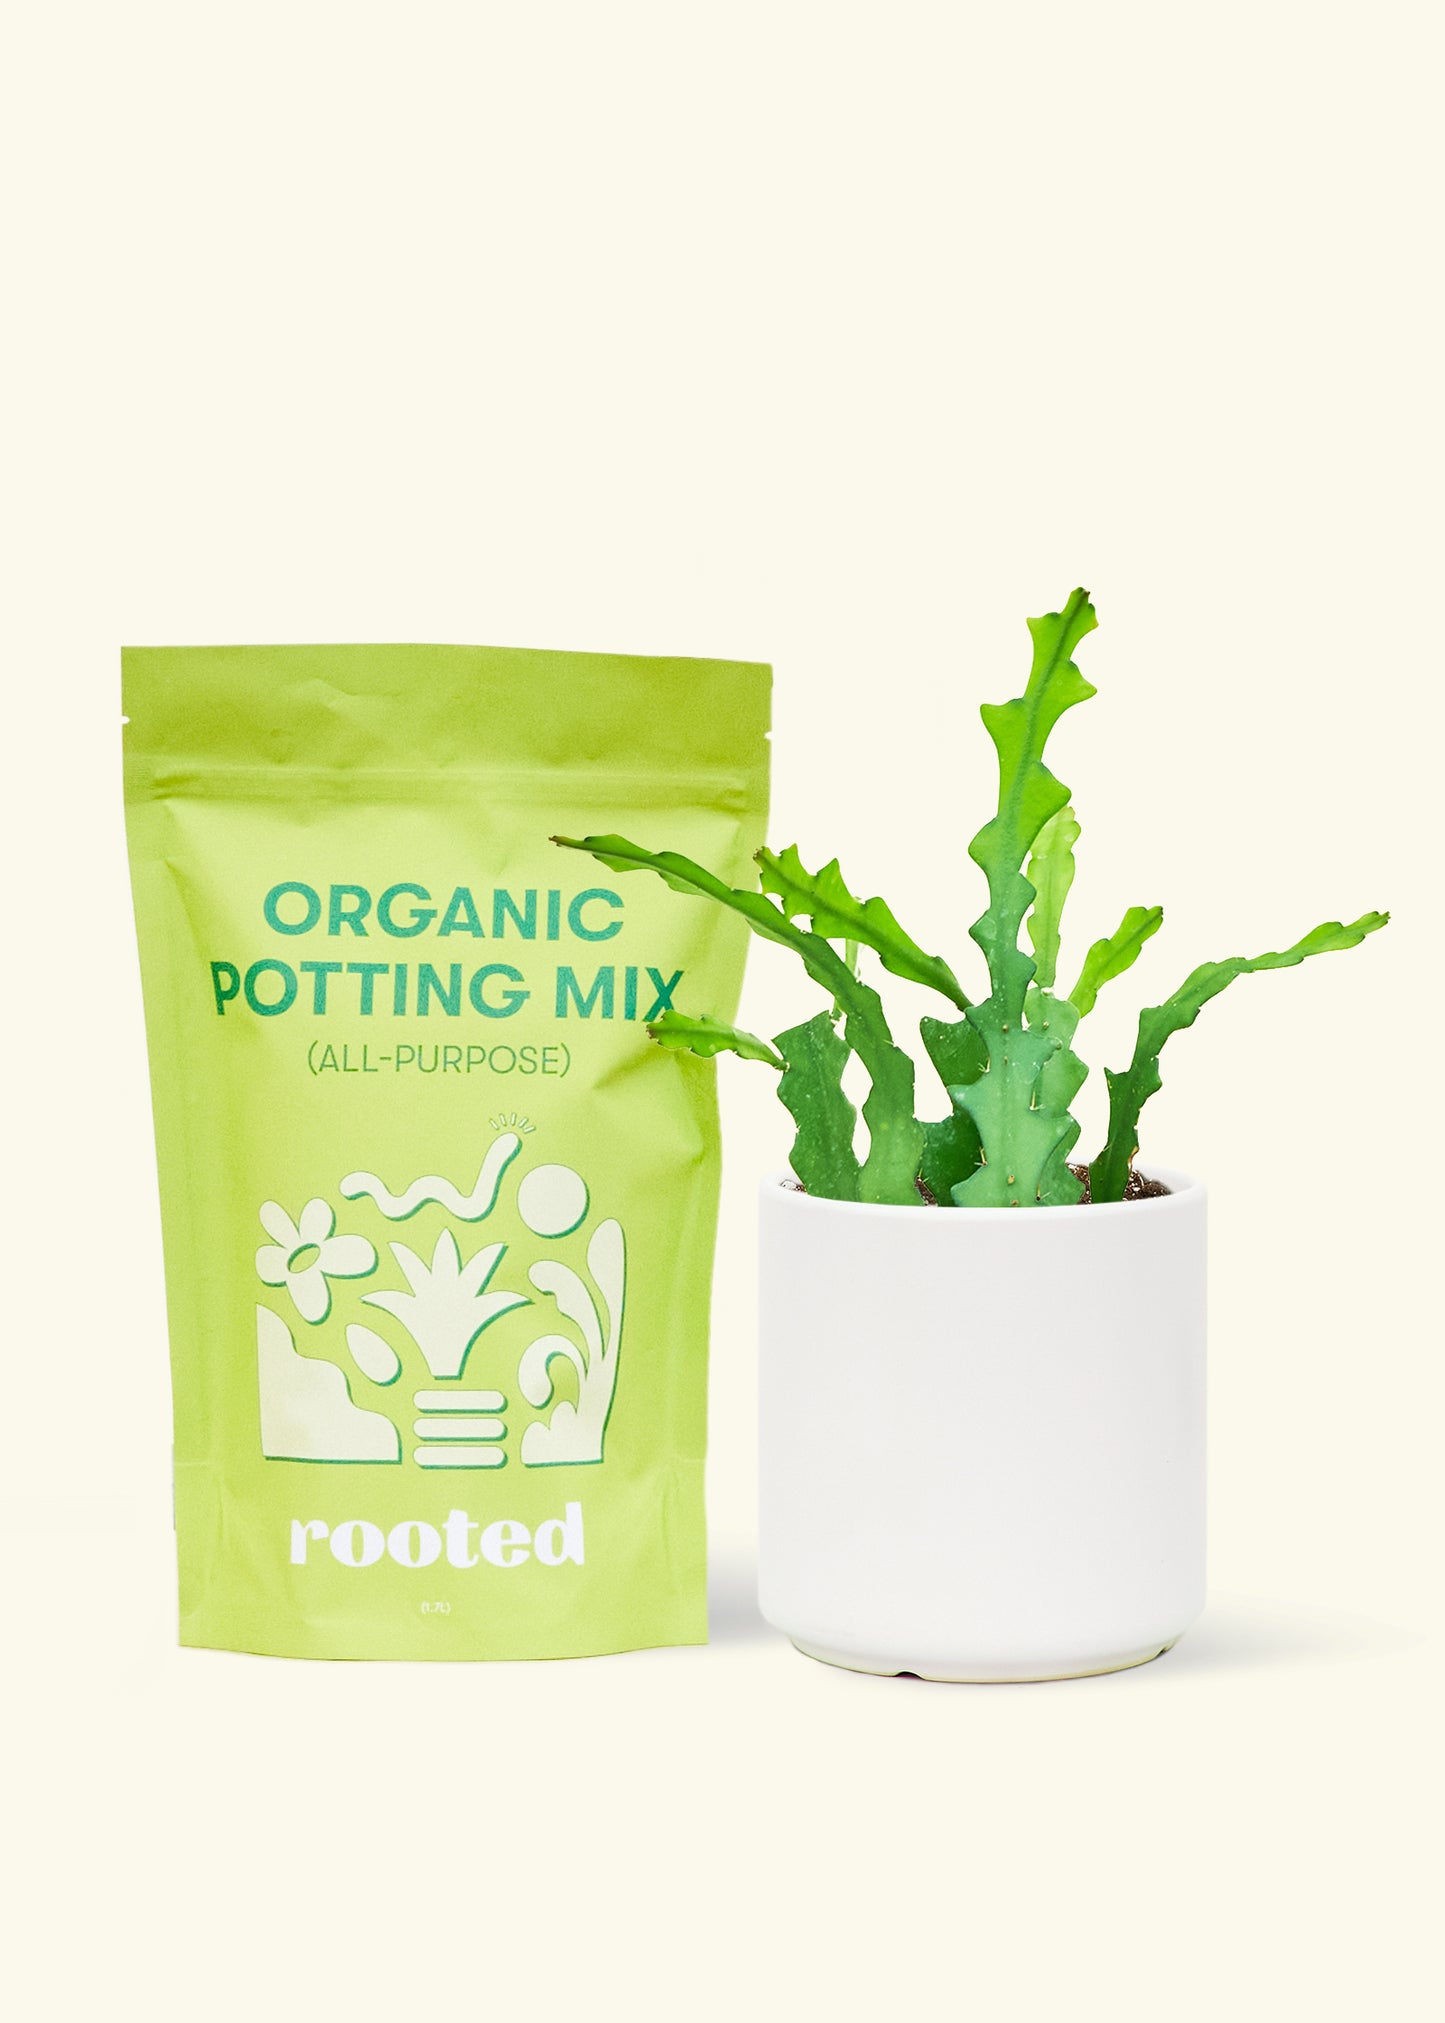 A bag of Organic Potting Mix to the left of a Fishbone Cactus in a white cylinder ceramic pot.